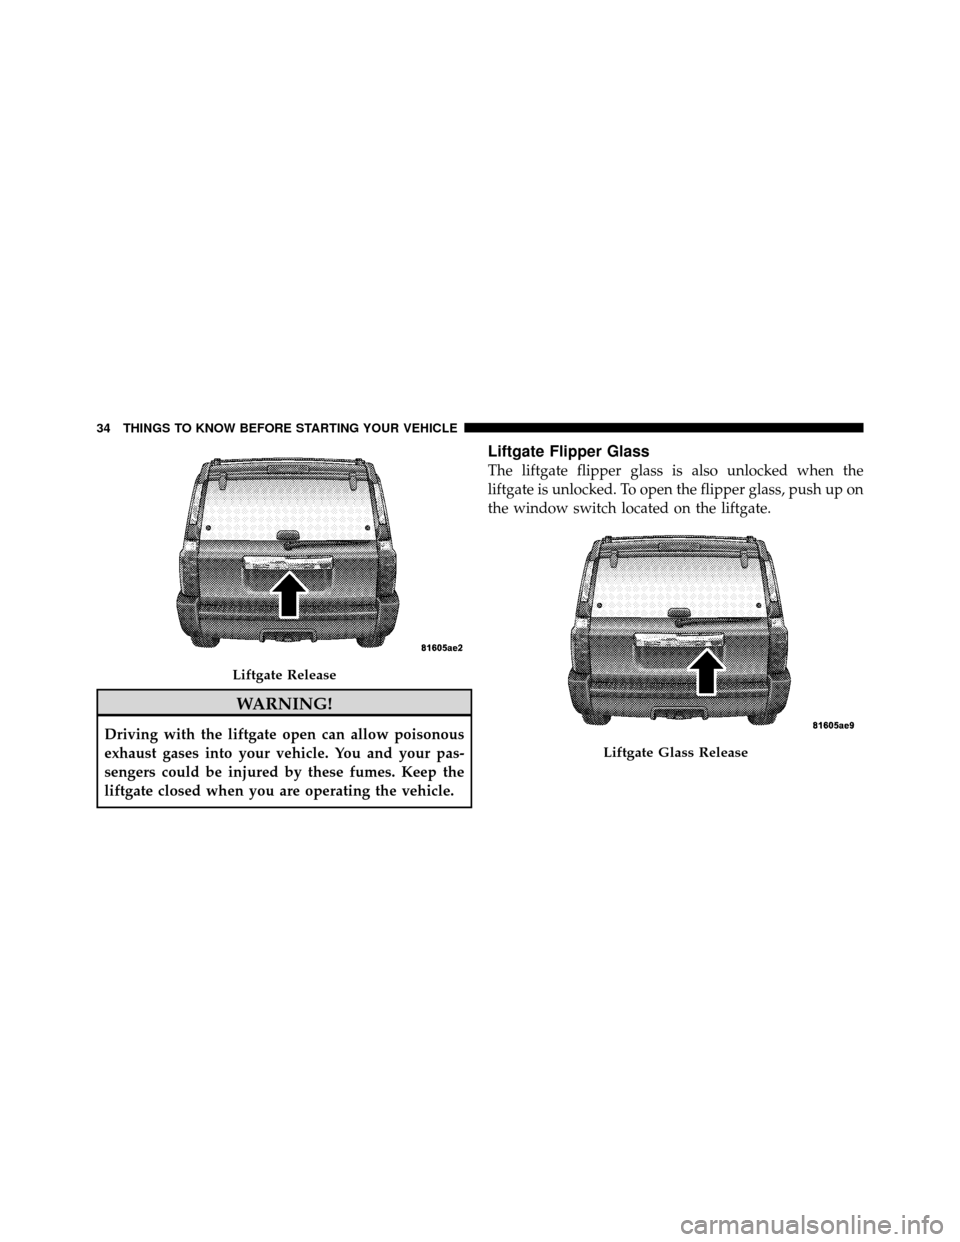 JEEP COMMANDER 2010 1.G Owners Guide WARNING!
Driving with the liftgate open can allow poisonous
exhaust gases into your vehicle. You and your pas-
sengers could be injured by these fumes. Keep the
liftgate closed when you are operating 